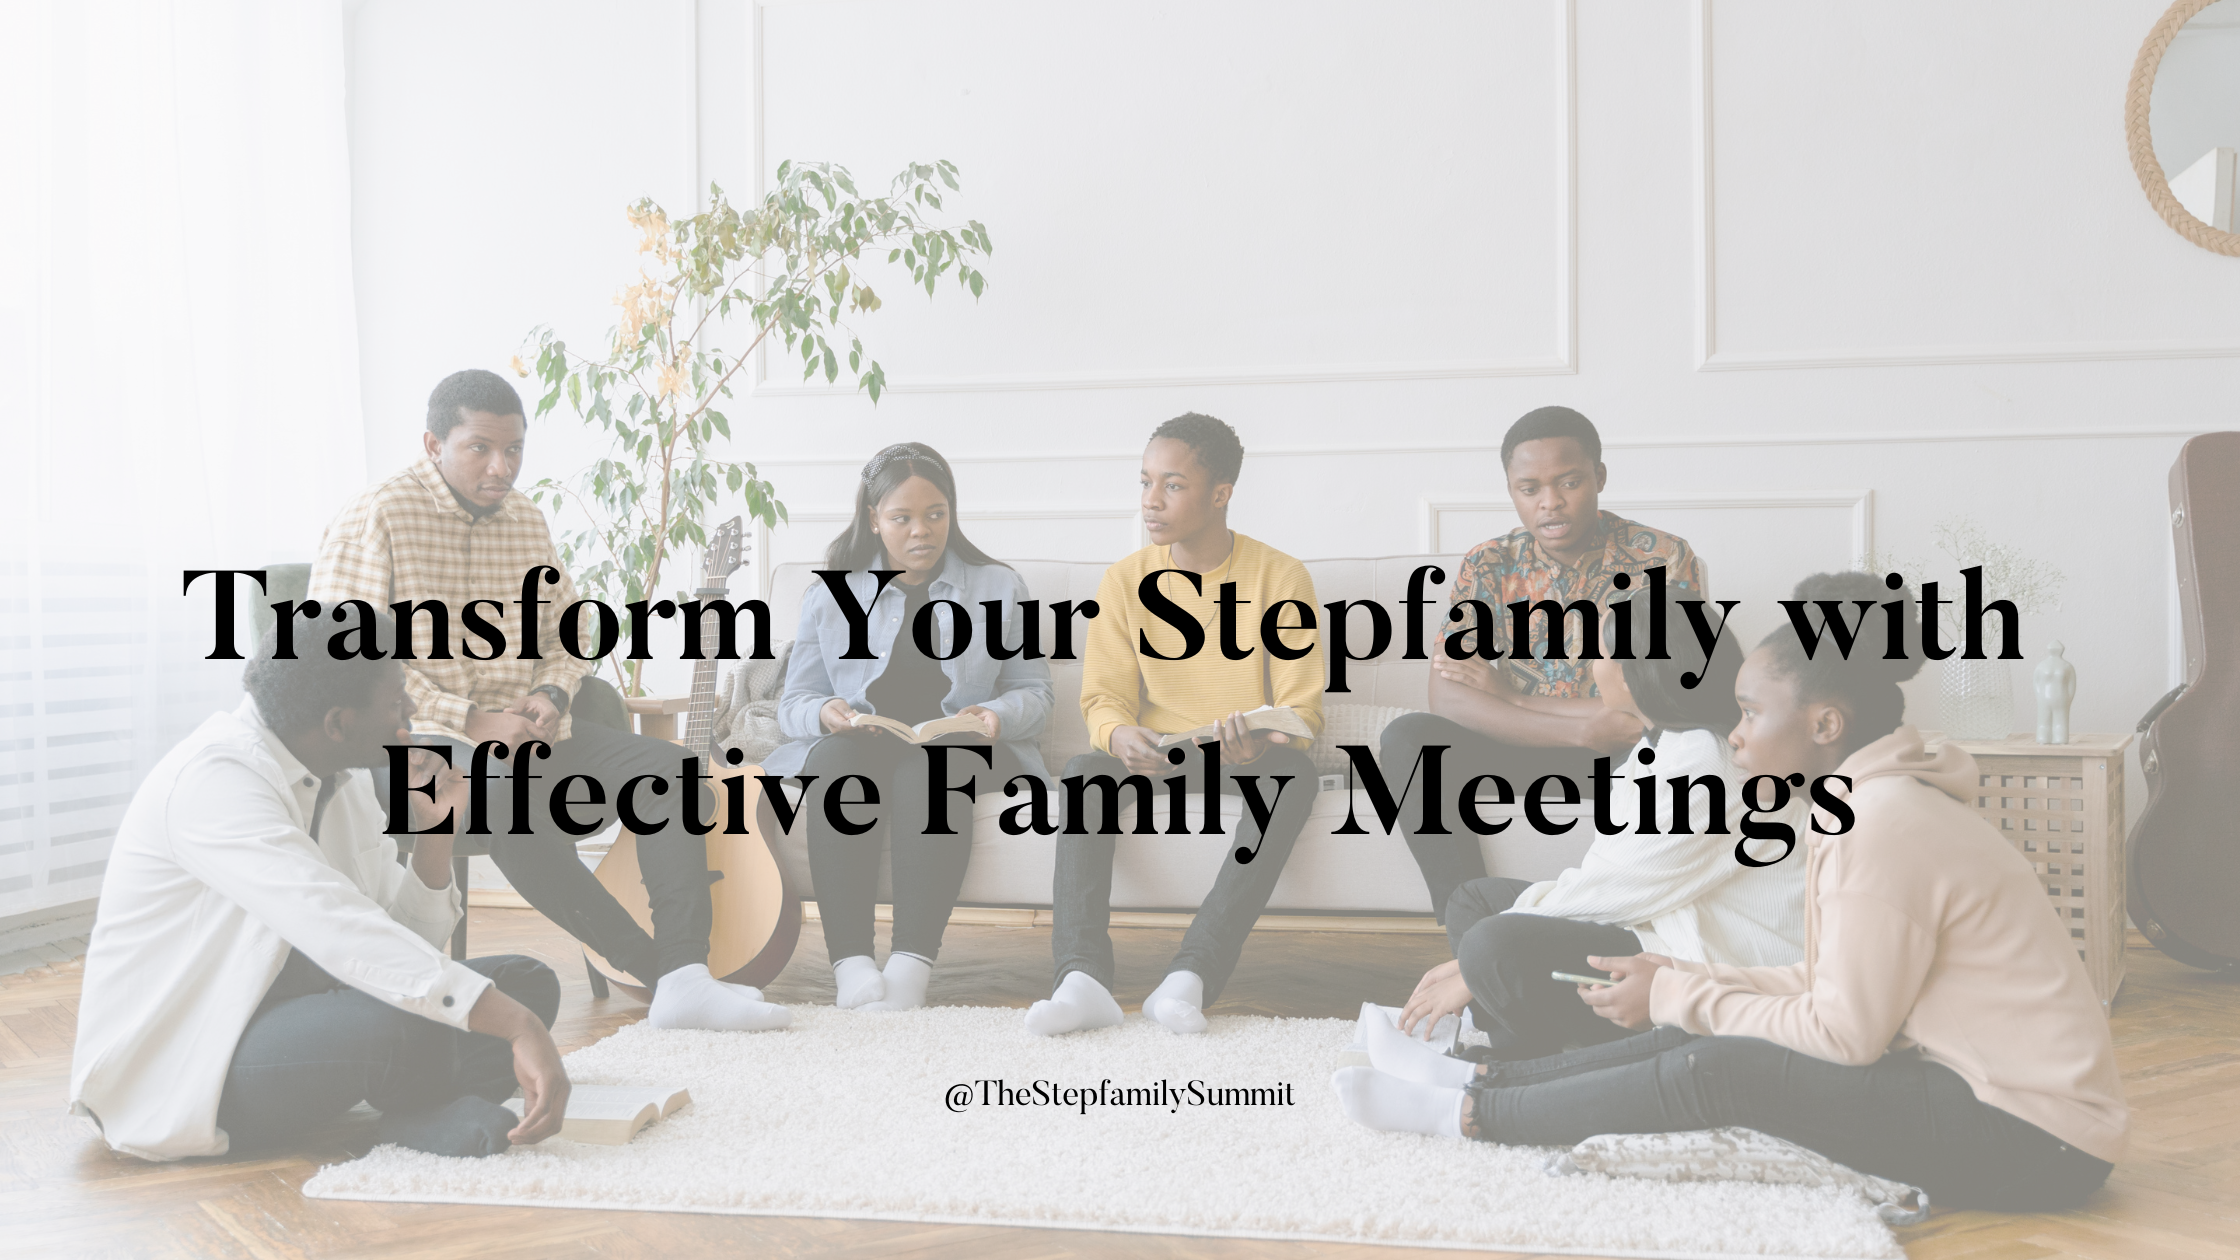 An image showing a diverse family seated together in a cozy living room, engaged in a family meeting. The text overlay reads 'Transform Your Stepfamily with Effective Family Meetings' and the image is credited to @TheStepfamilySummit.